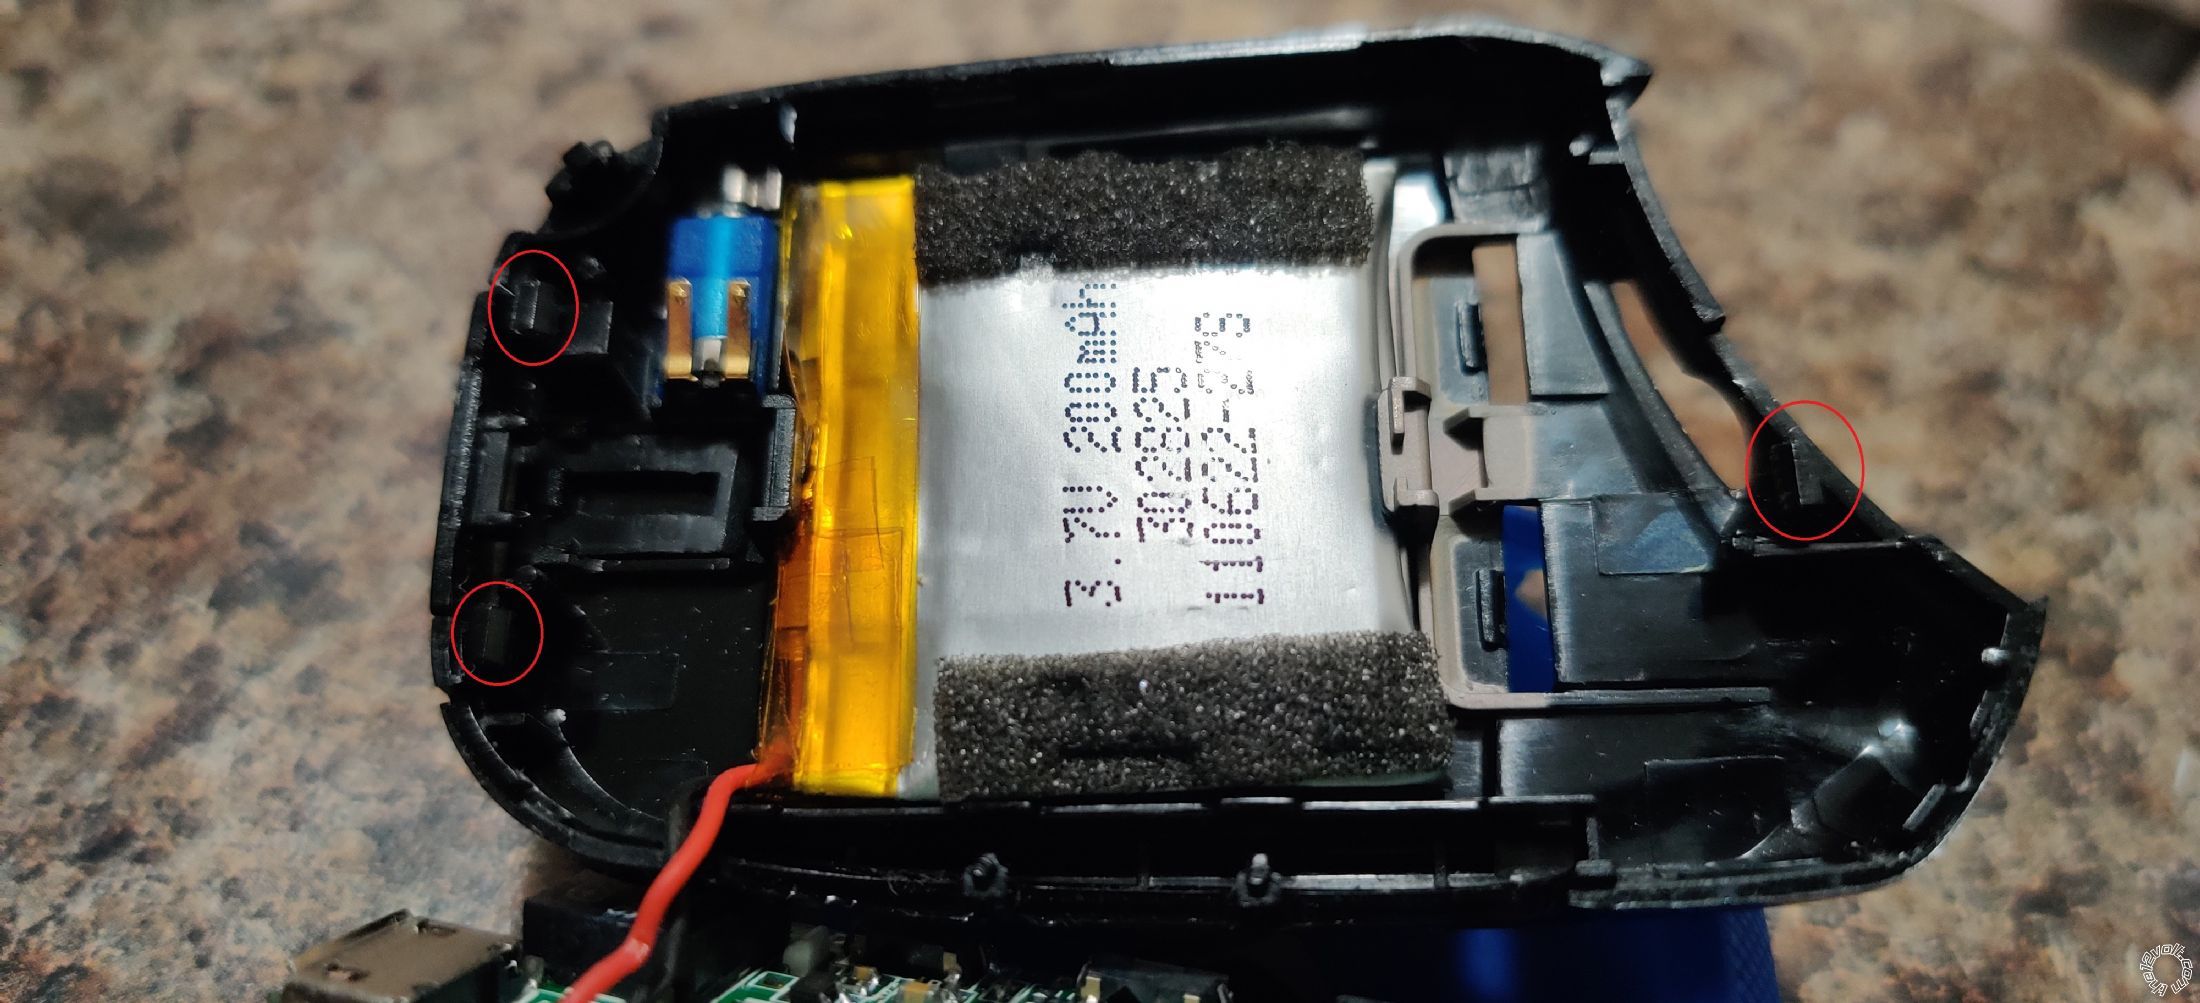 Compustar 2W901R-SS Battery -- posted image.